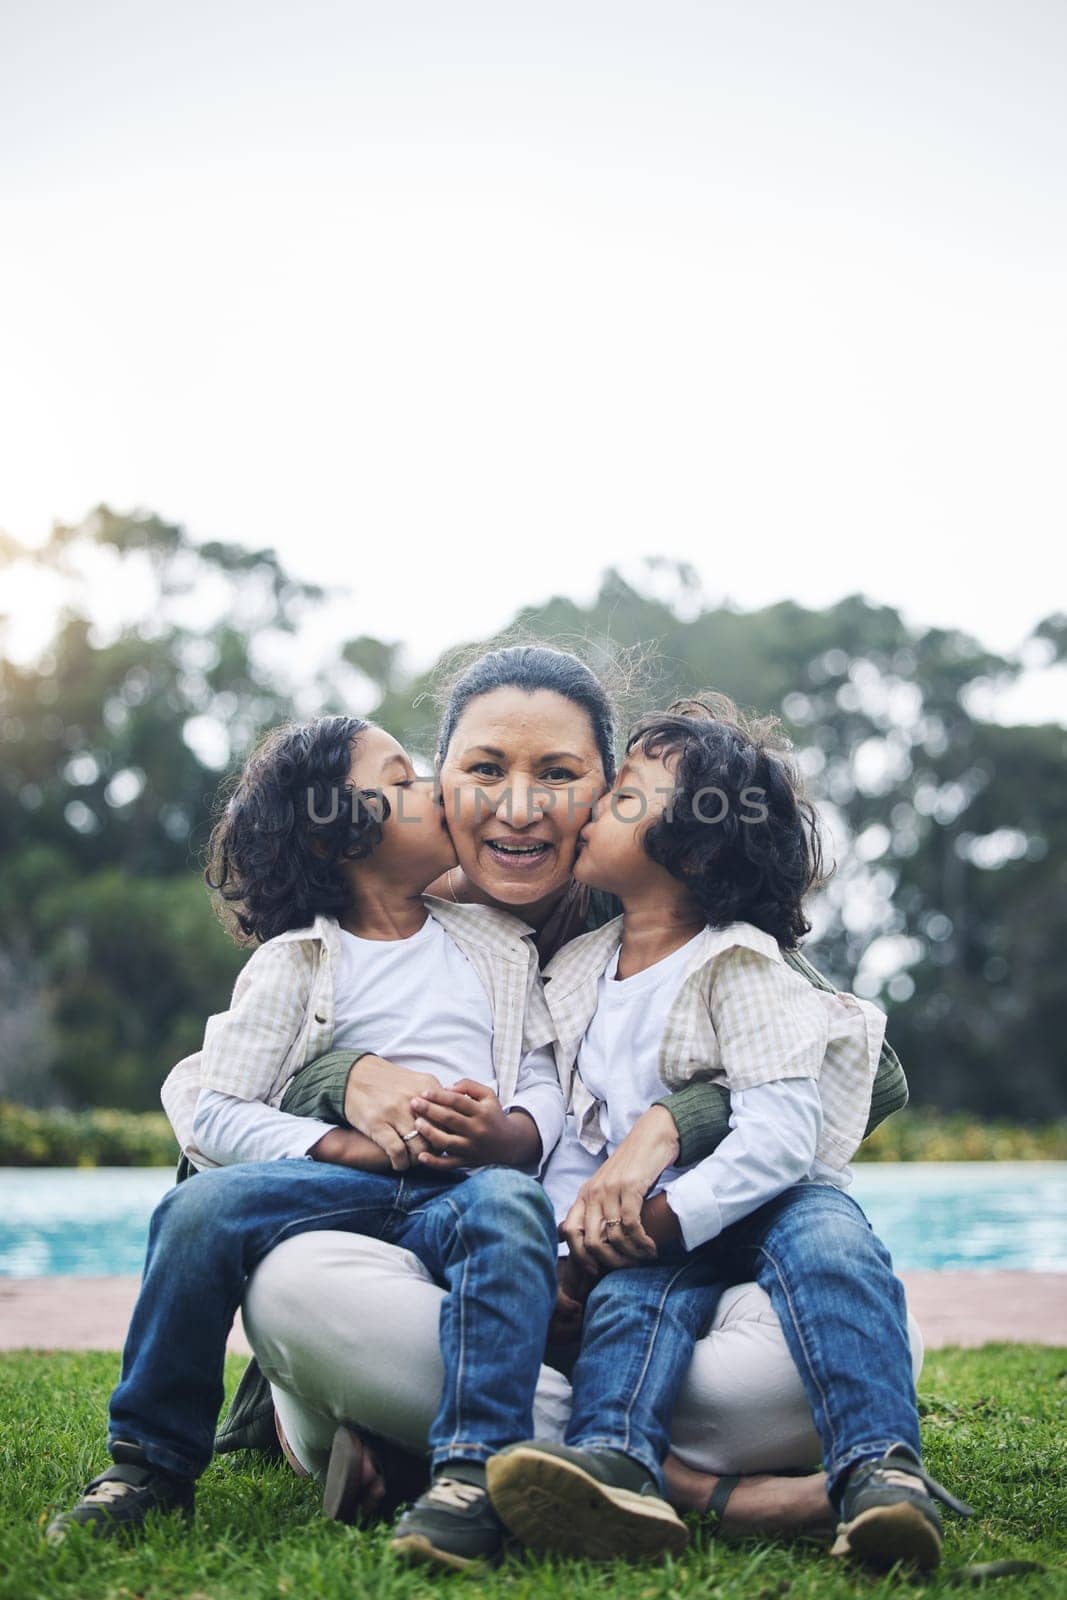 Park, kiss and portrait of mother and children for bonding, quality time and affection outdoors together. Happy family, relax and kids with mom in nature embrace for care, loving relationship and joy.